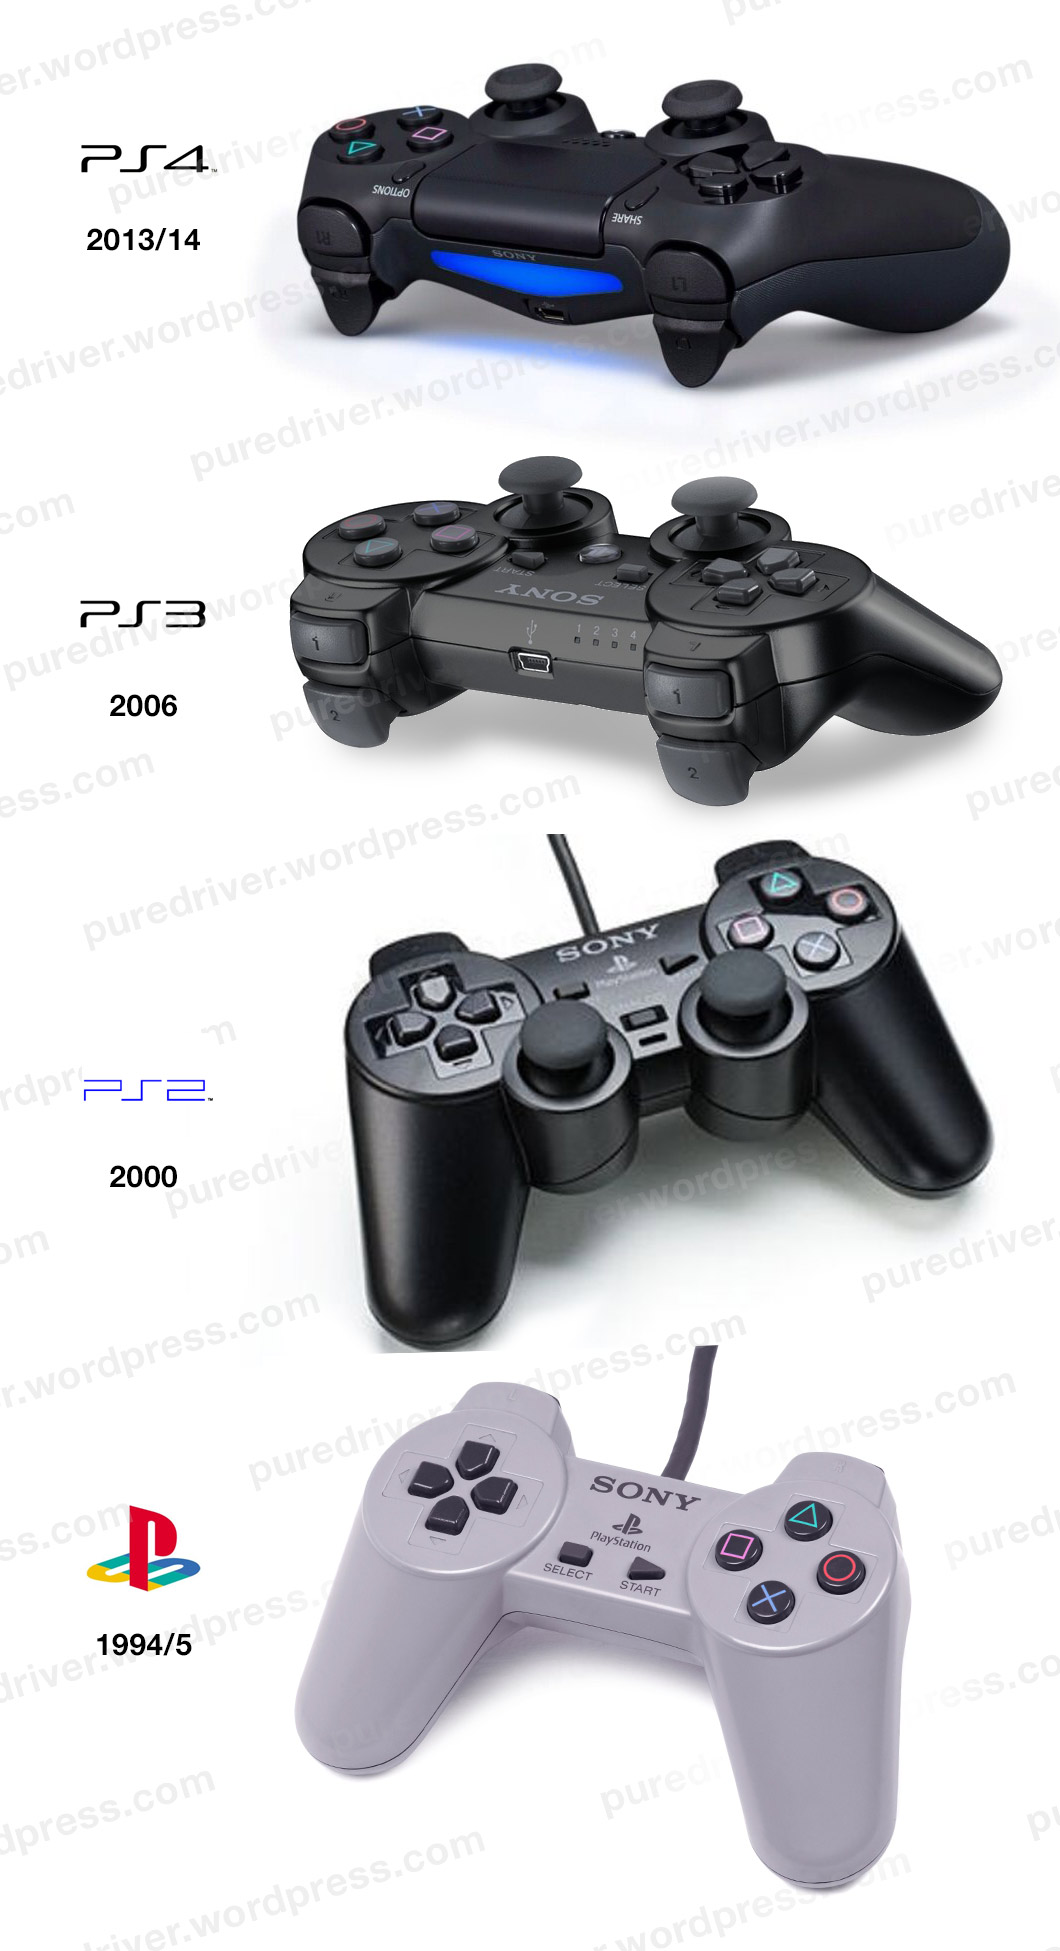 install driver for ps3 controller